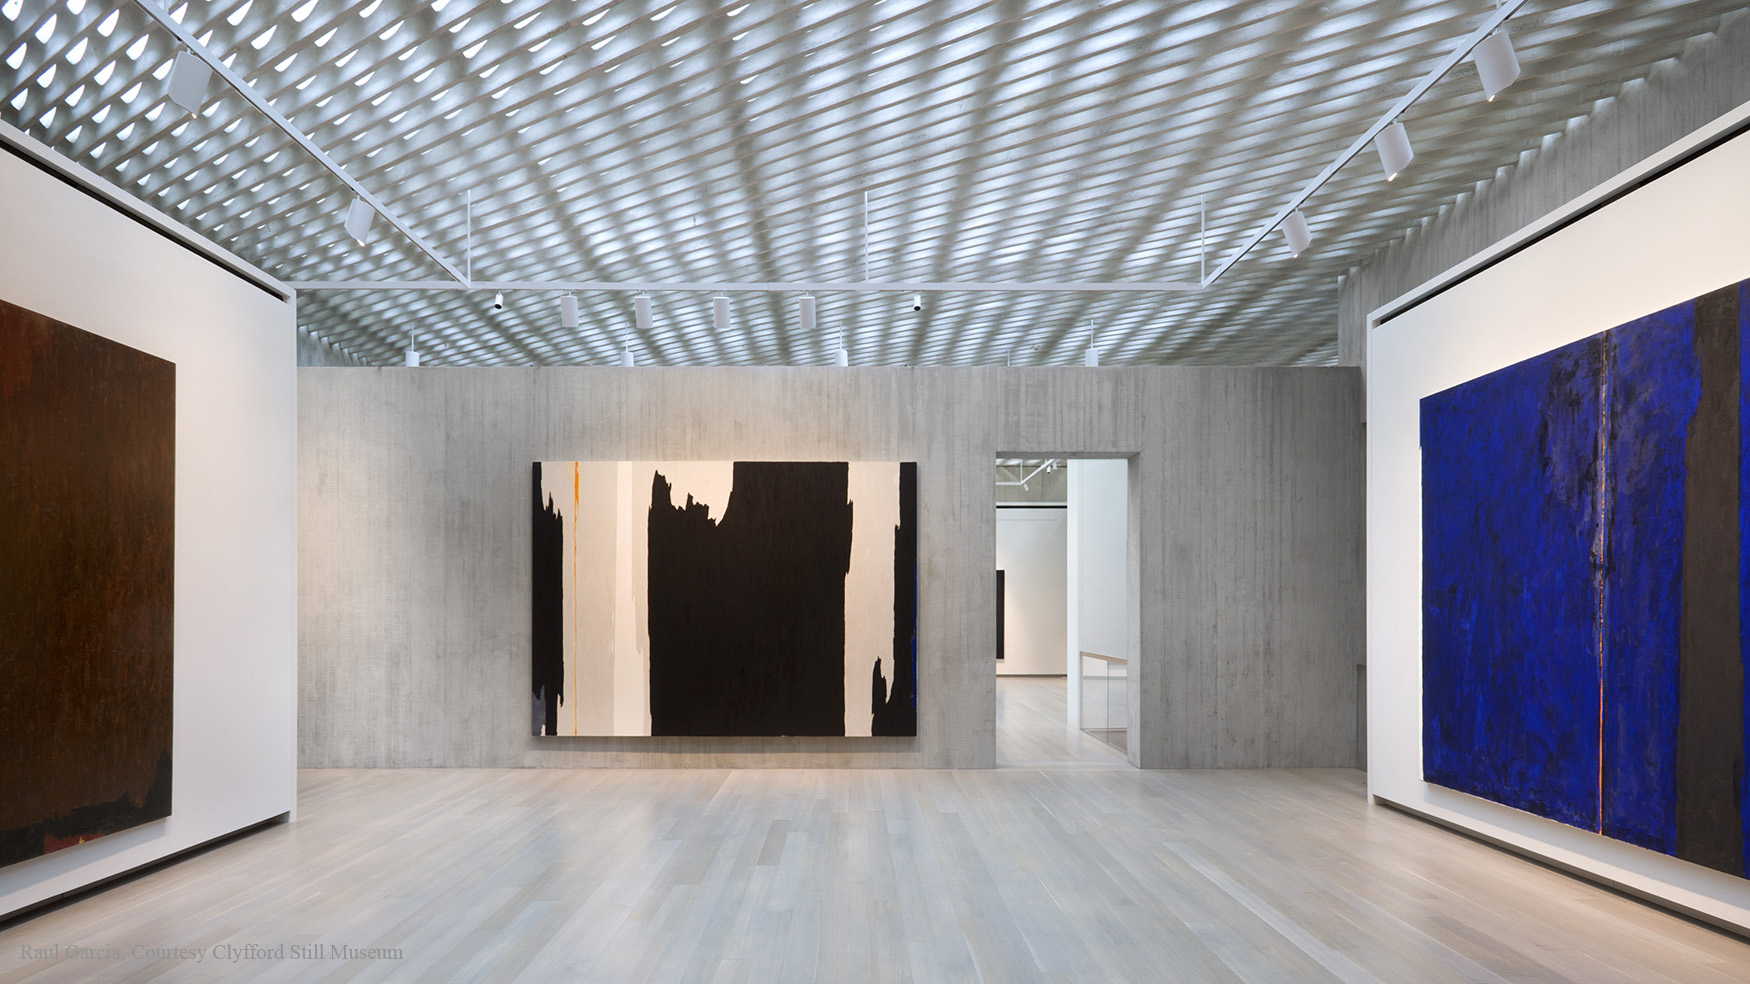 Gallery inside the Clyfford Still Museum with large abstract paintings on the wall and the ceiling visible